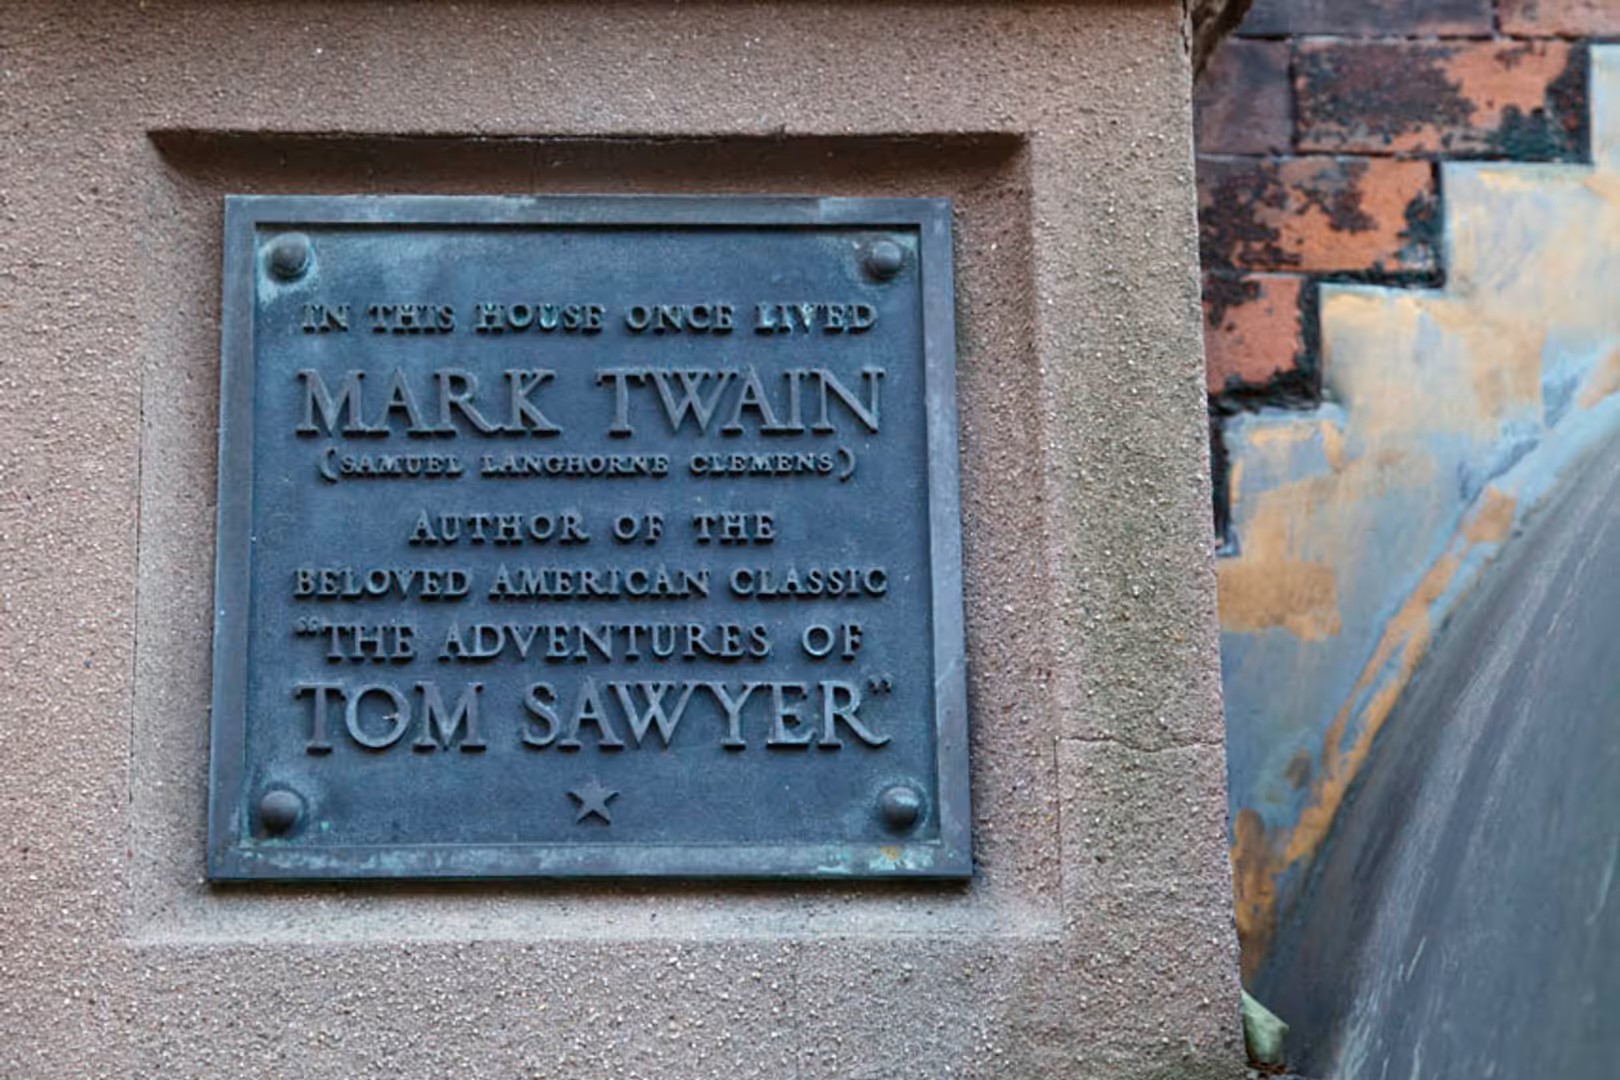 Mark Twain lived here in the first years of the 20th Century. Plaque reads: In this house once lived Mark Twain (Samuel Langhorne Clemens), author of the beloved American classic The Adventures of...